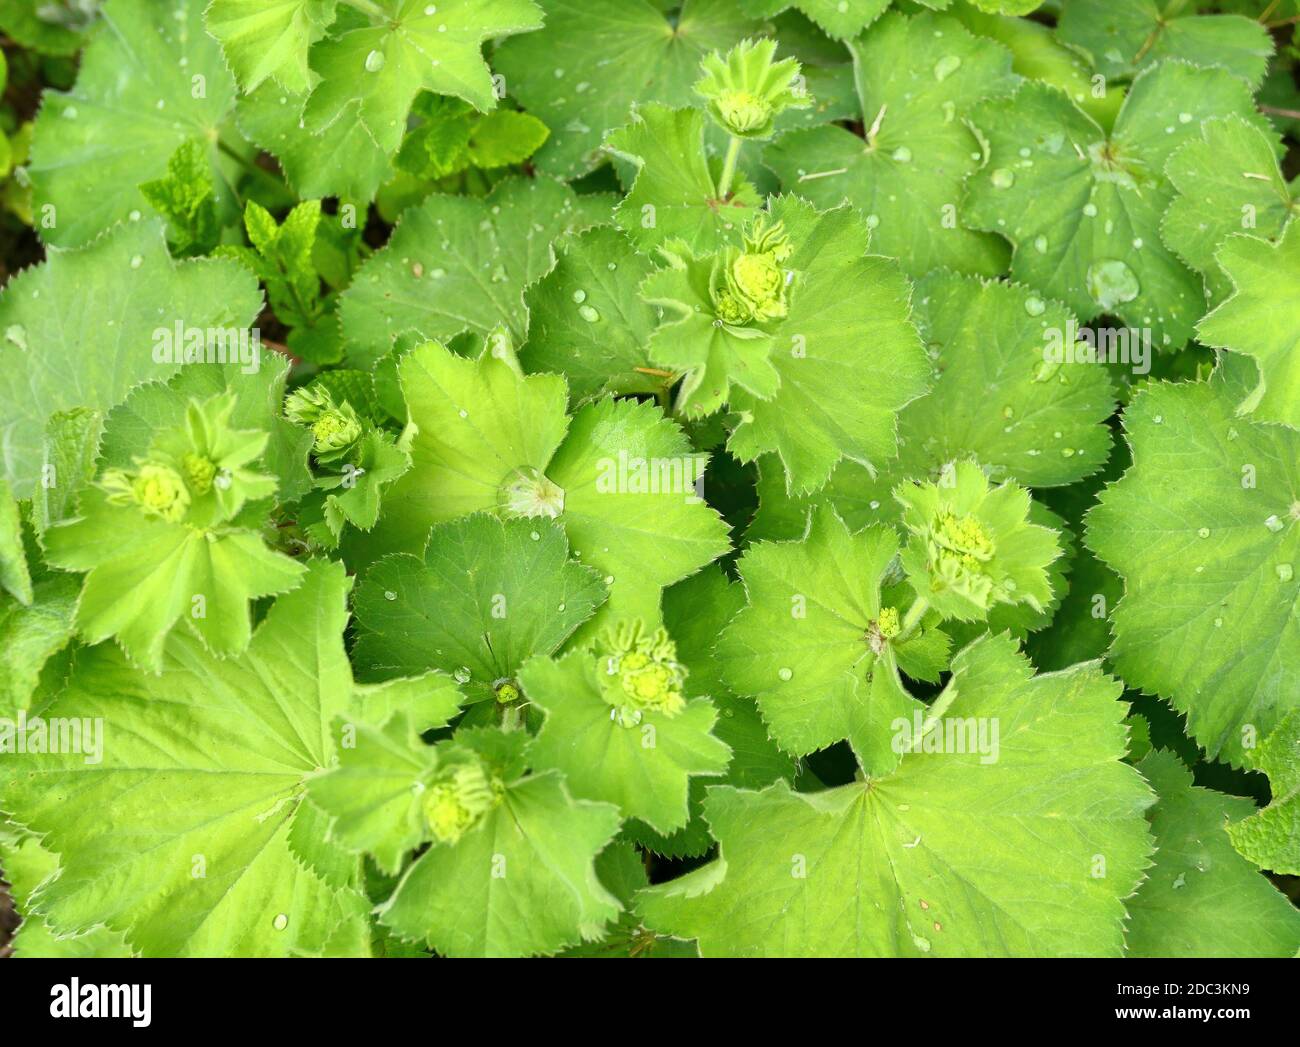 Lady's mantle Alchemilla plant with rain drops on leaves. Ornamental and medicinal herb. Green leaves background. Stock Photo